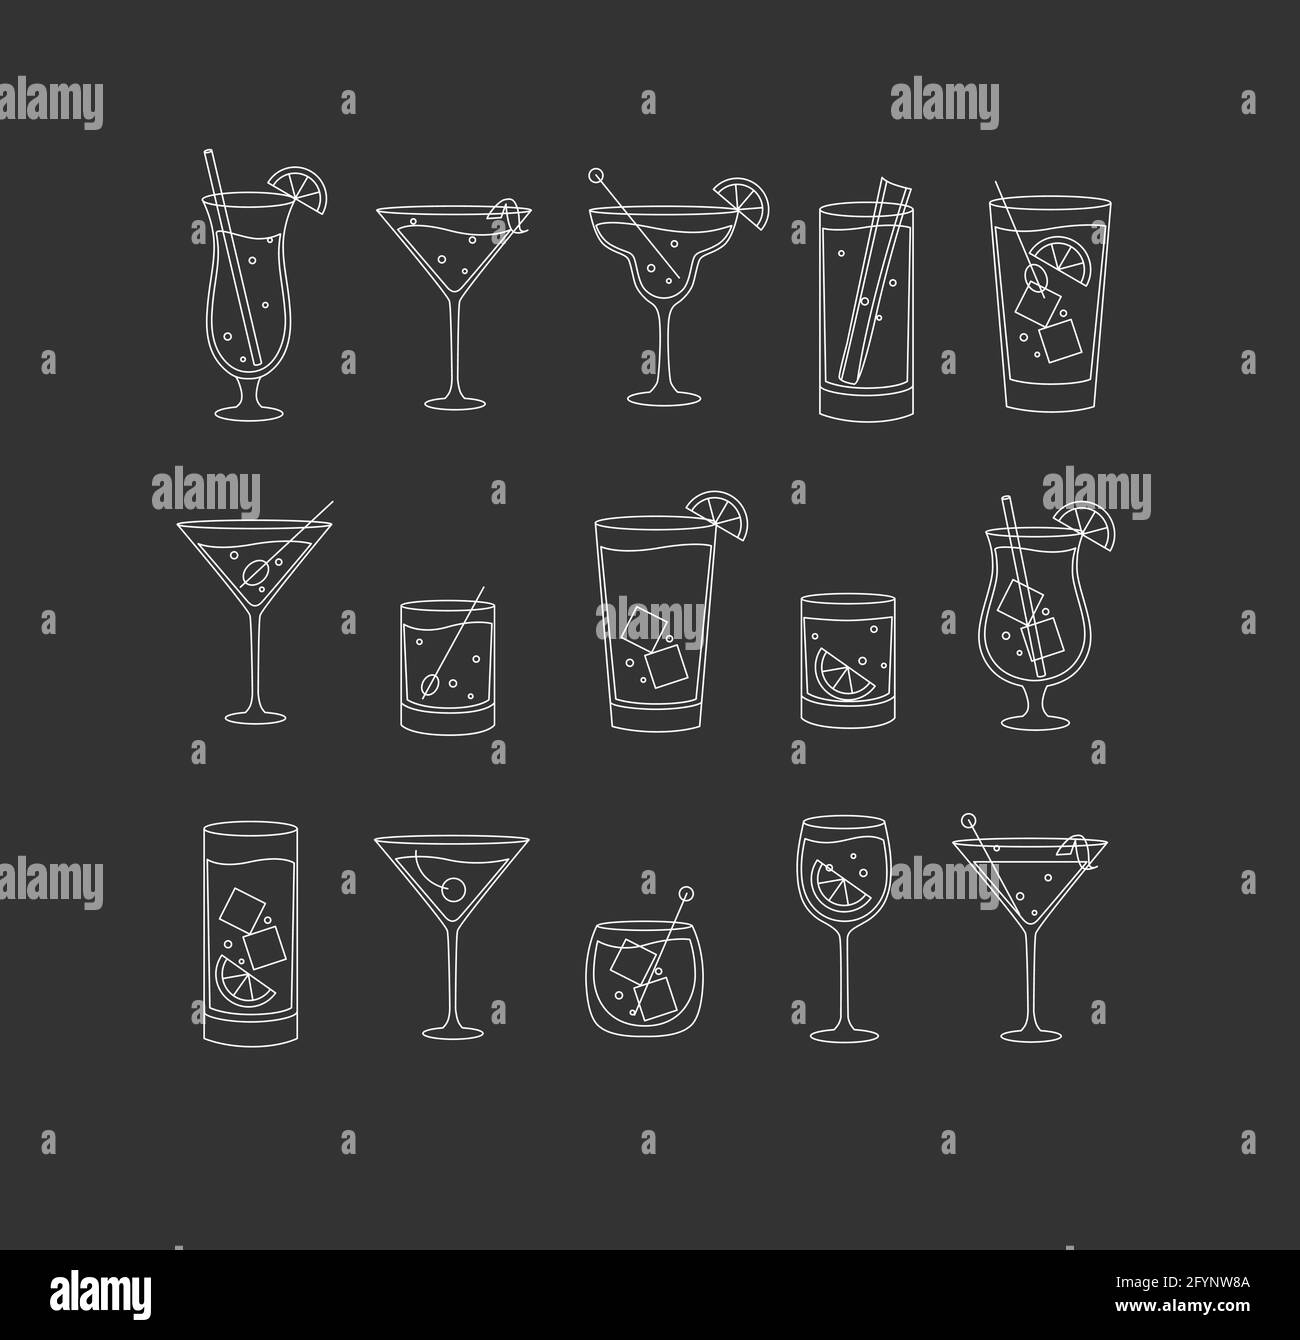 Alcohol drinks and cocktails icon set in flat line style on dark background. Stock Vector